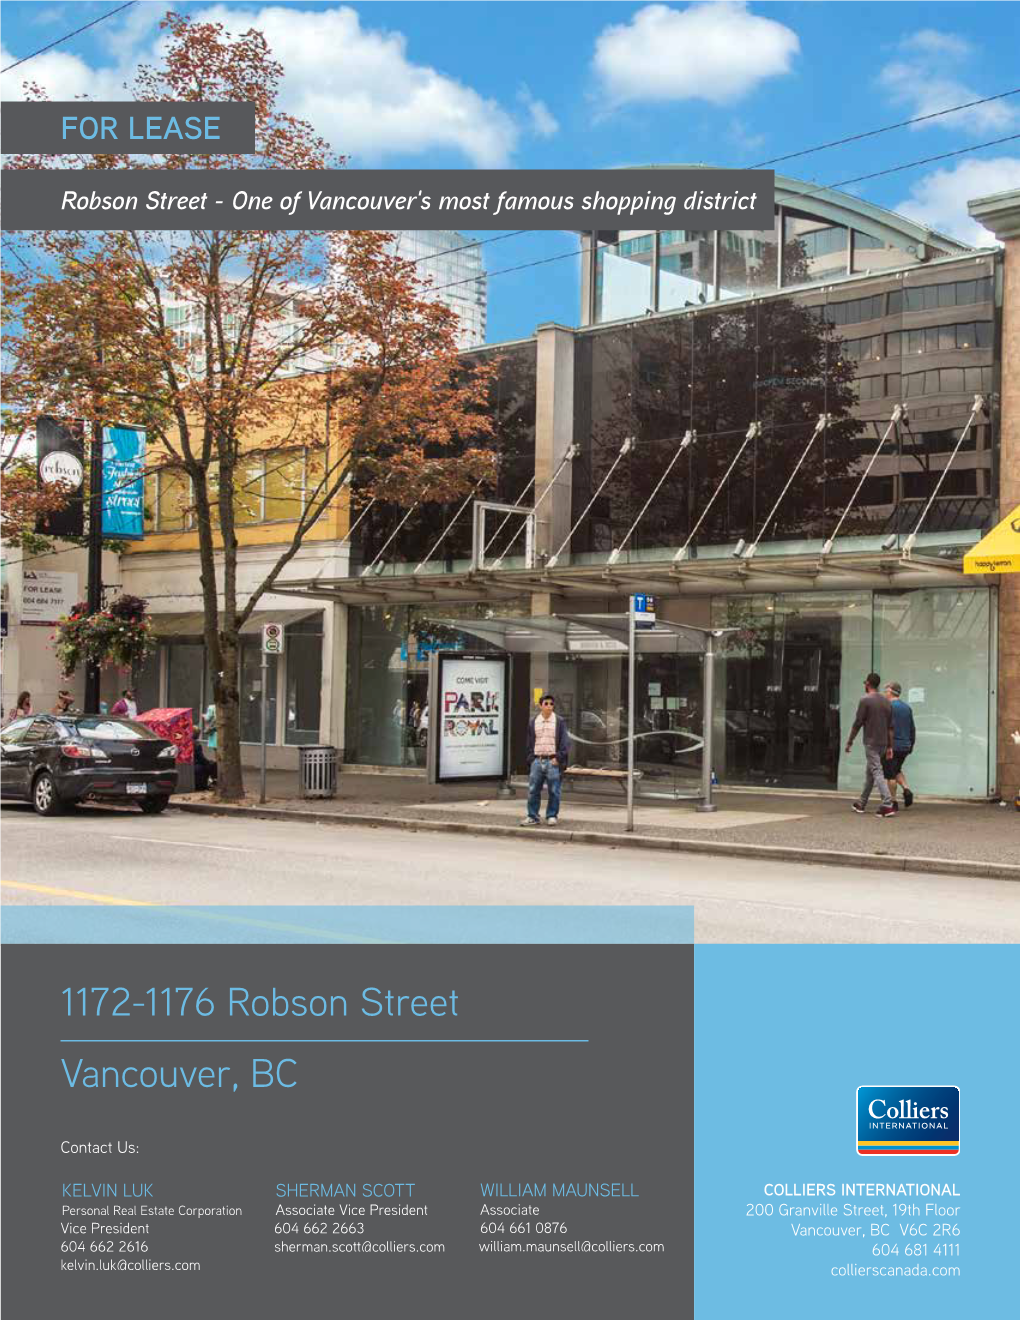 1172-1176 Robson Street Vancouver, BC